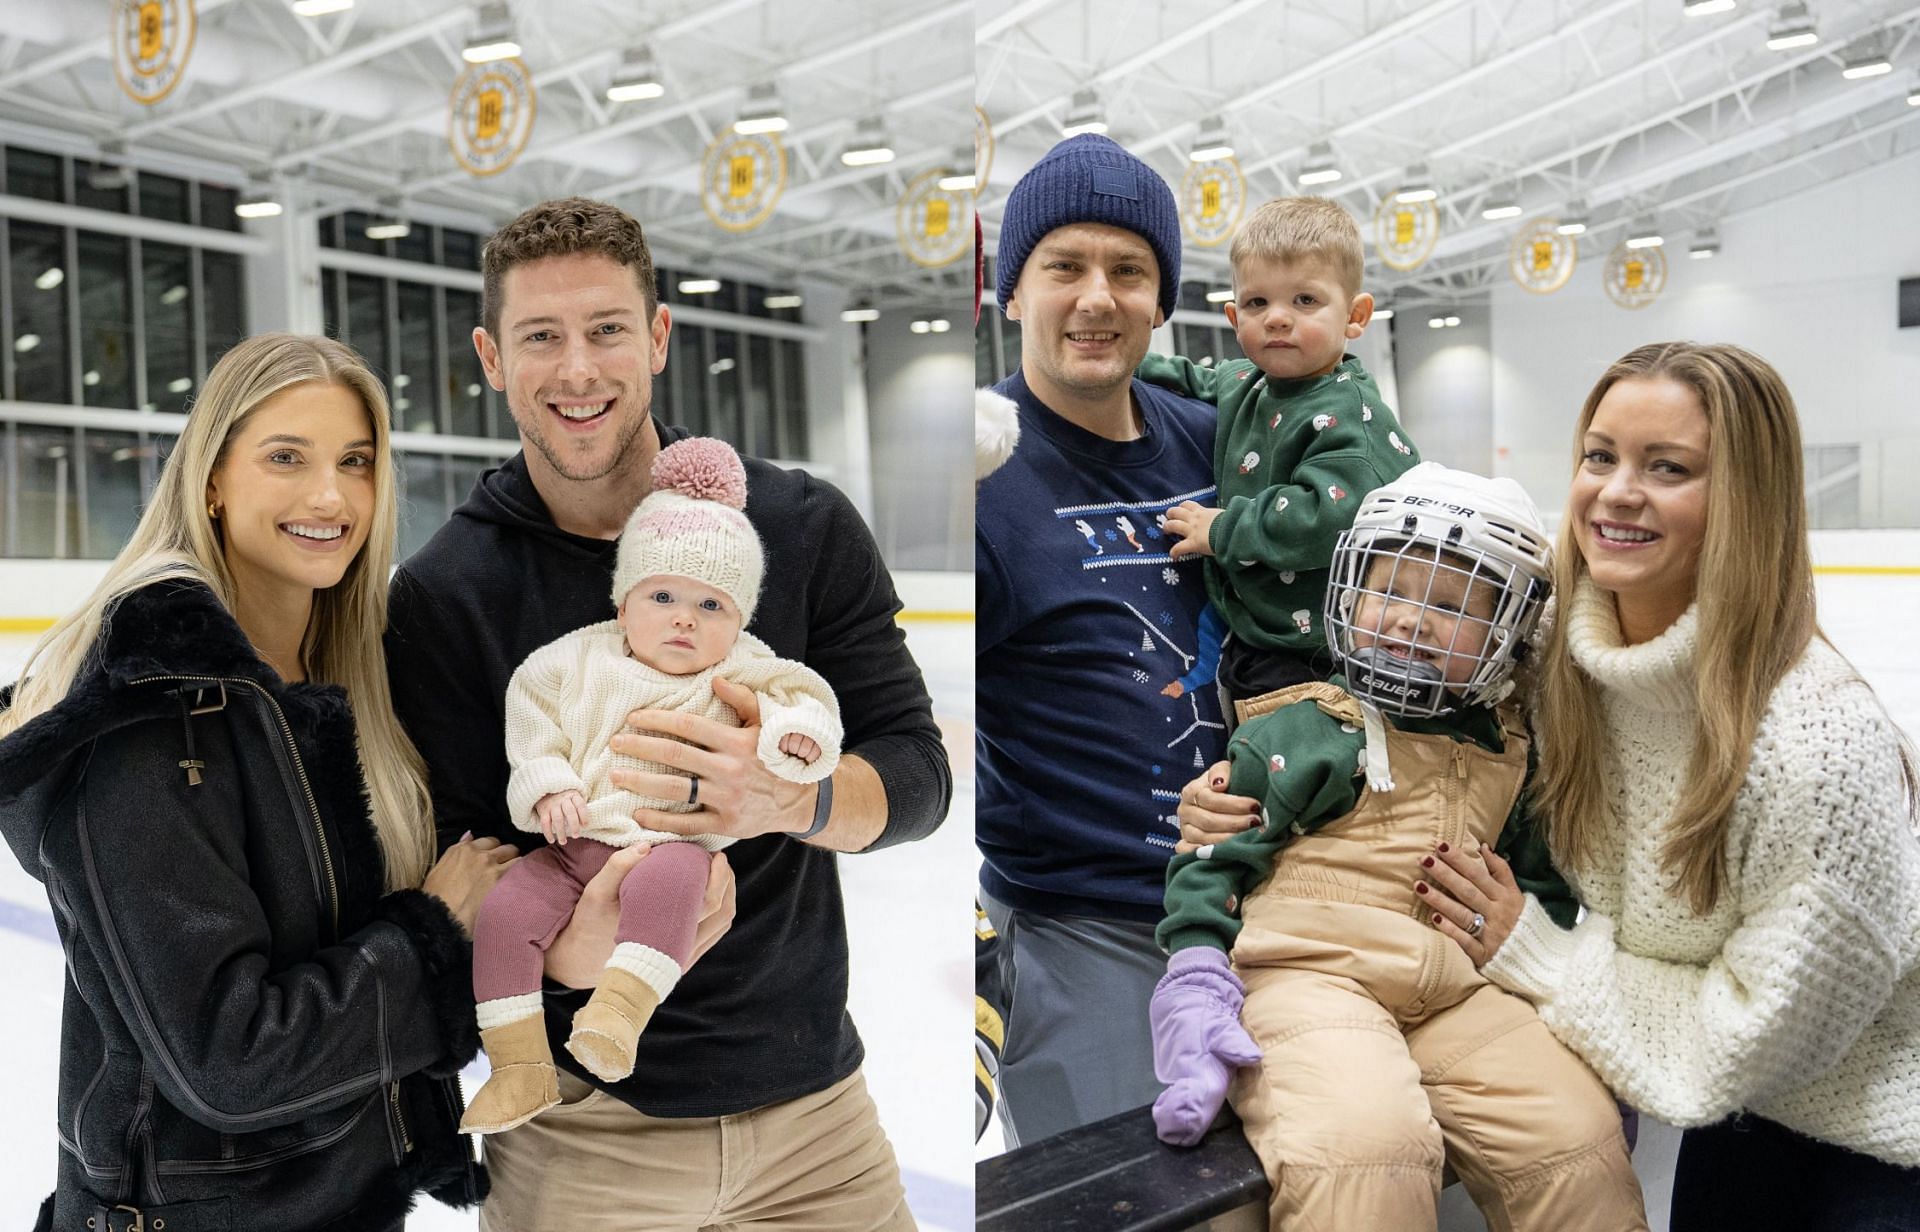 Linus Ulmark, Charlie Coyle and other Bruins teammates gather with family for adorable holiday skate pics